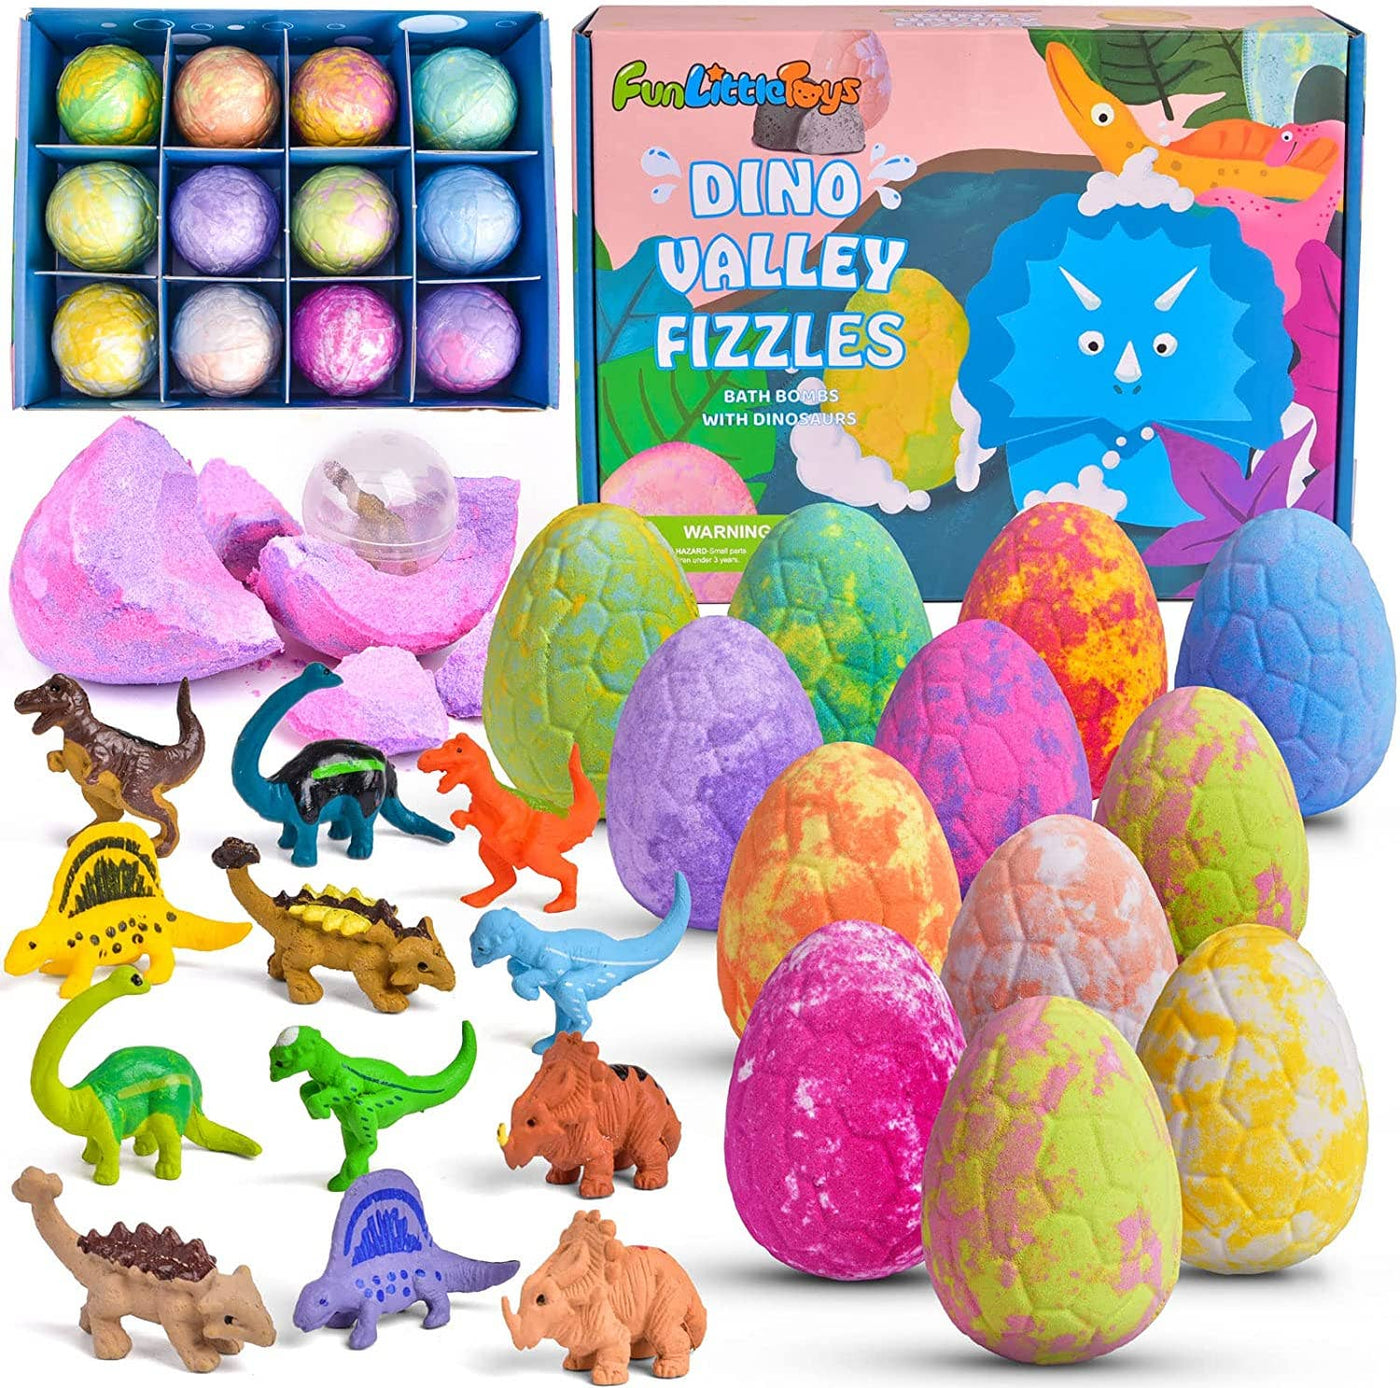 12 Ancient Dinosaurs Bath Bombs for Kids with Toys